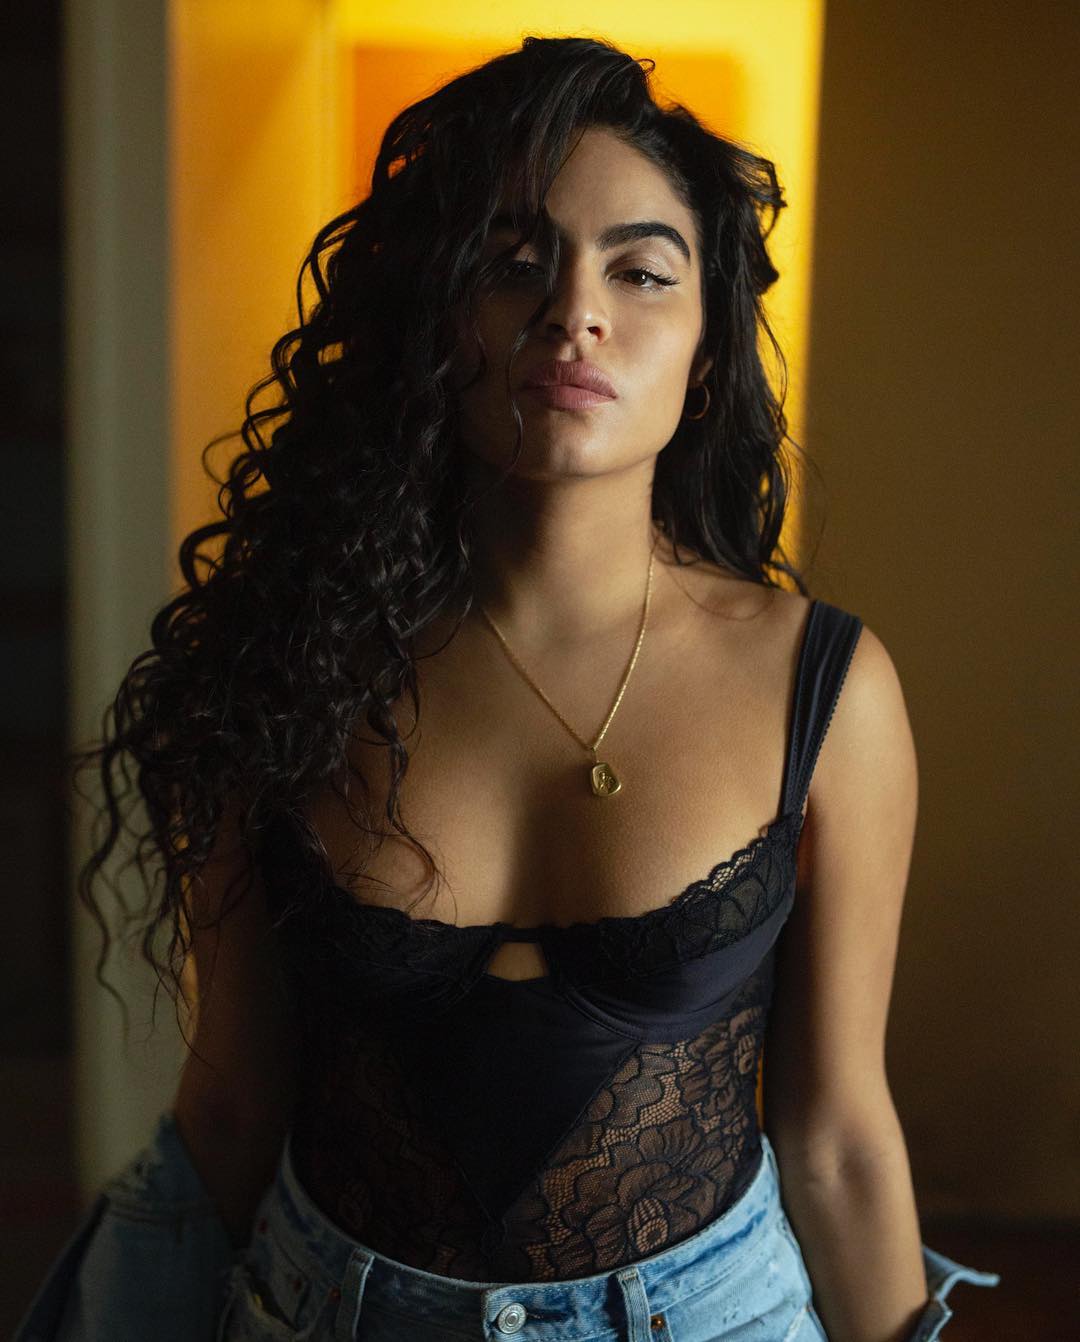 The Hottest Photos Of Jessie Reyez Will Make Your Day ...